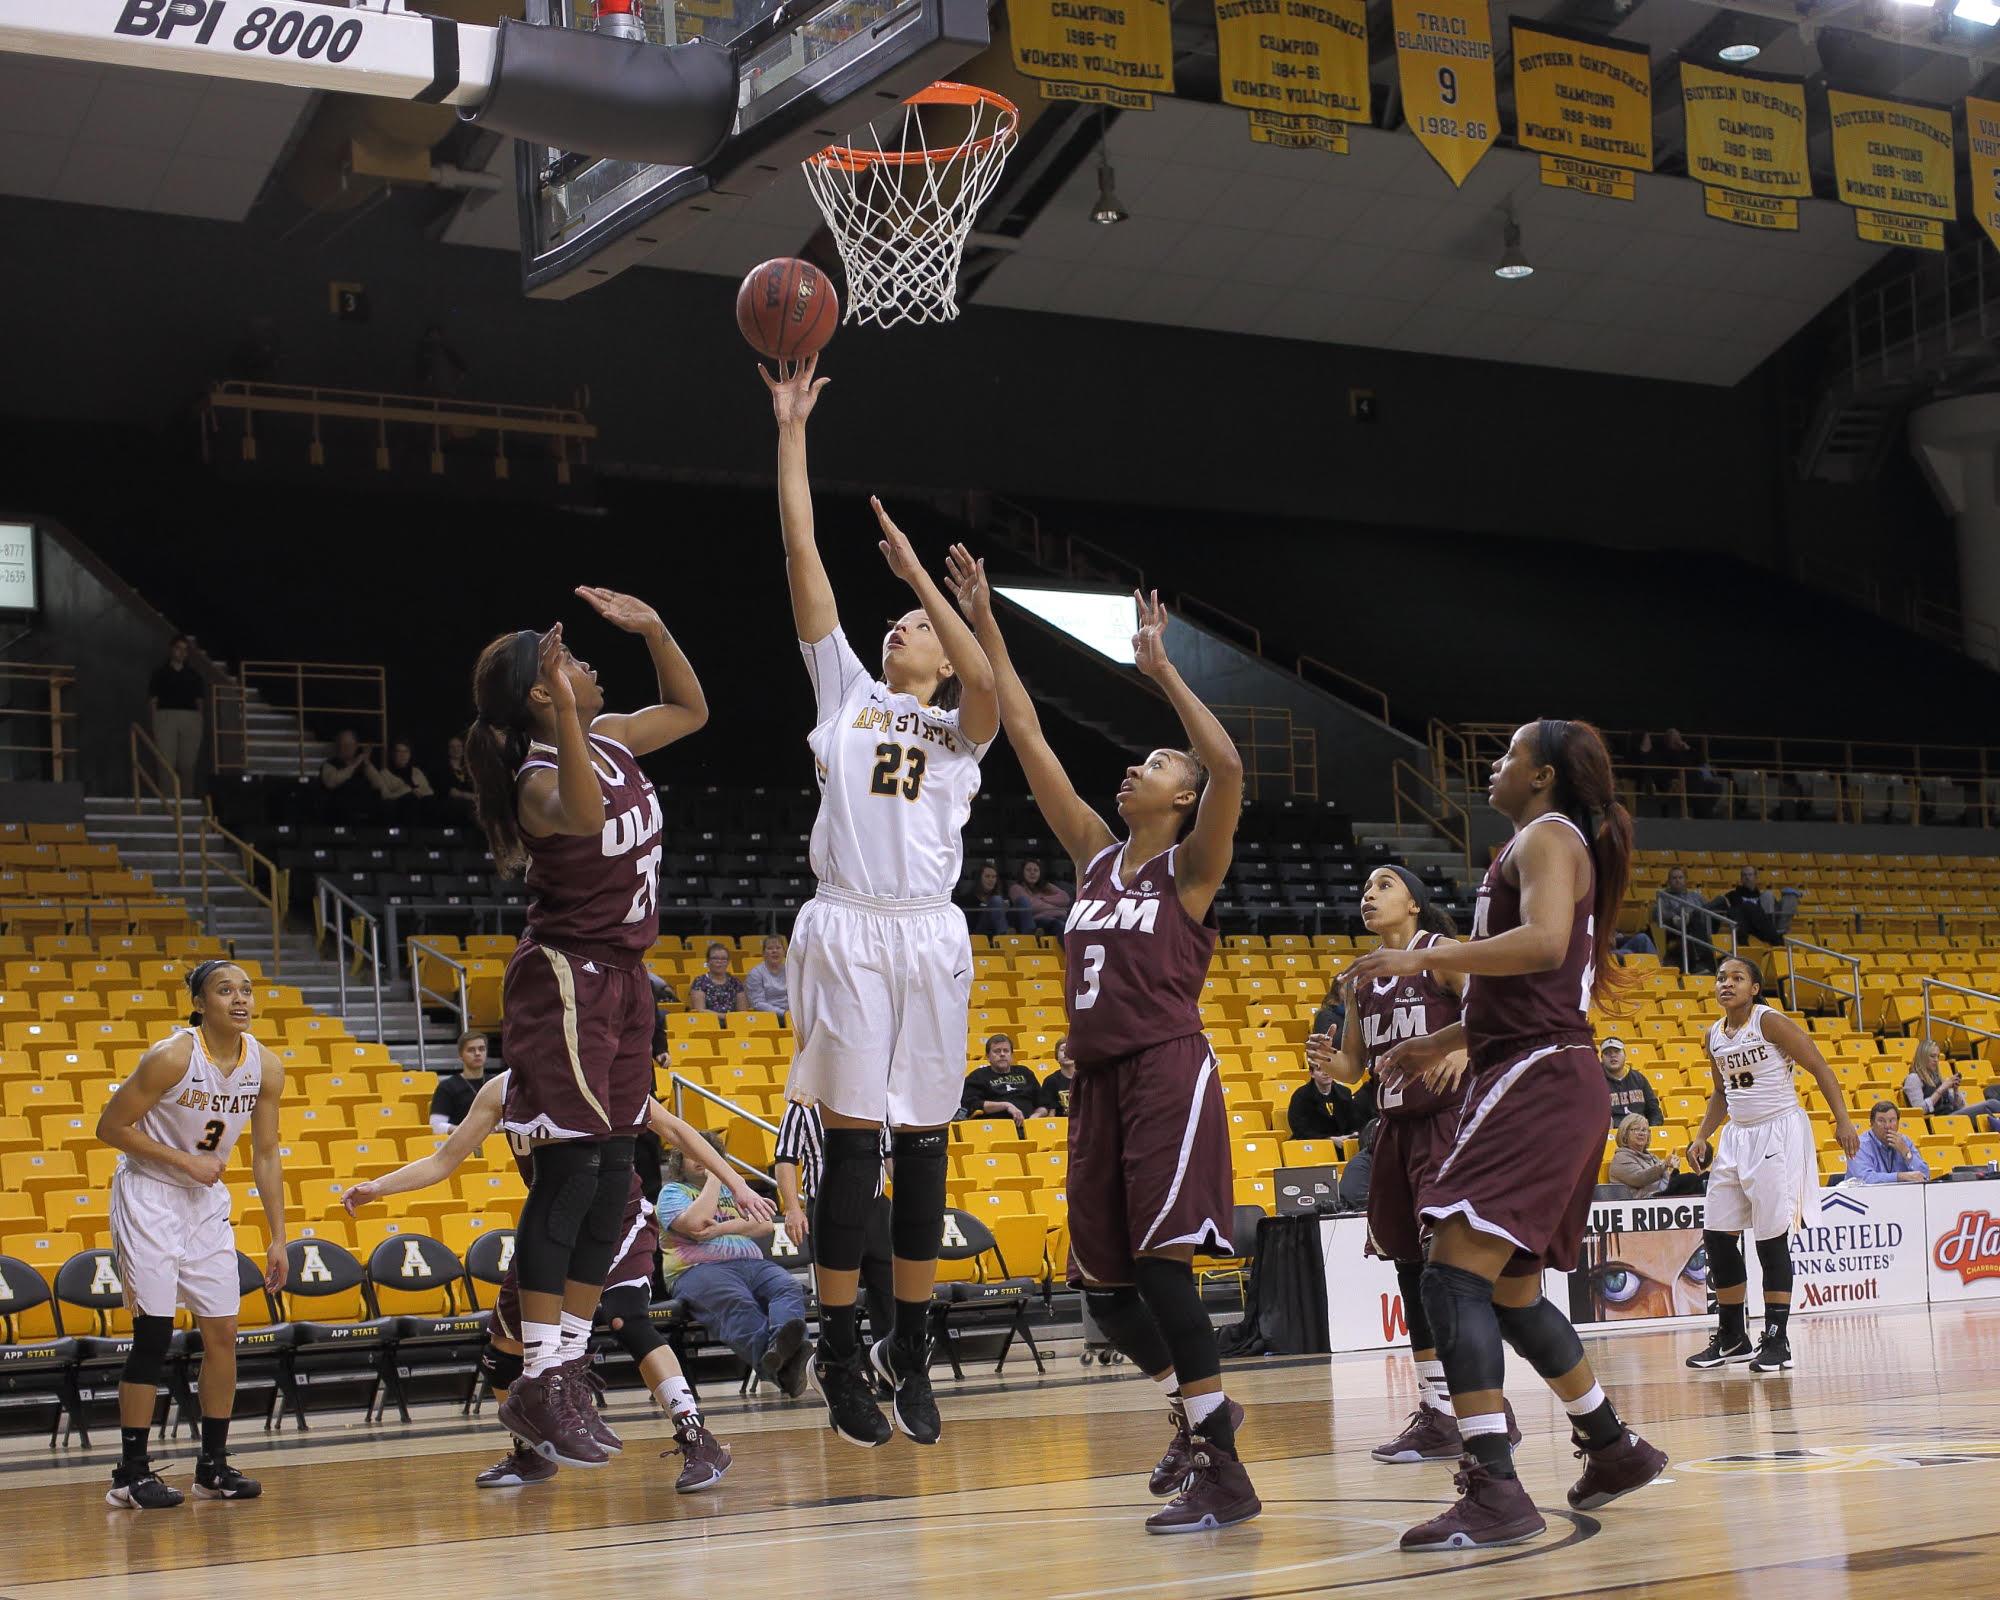 Senior+forward+KeKe+Cooper+goes+up+for+one+of+her+6+baskets+during+Saturdays+64-52+victory+over+Louisiana-Monroe.+Cooper+notched+her+fourth+double-double+of+the+season+in+the+win.++Photo+courtesy+of+Appalachian+State+Athletics+%7C+Bill+Sheffield.+